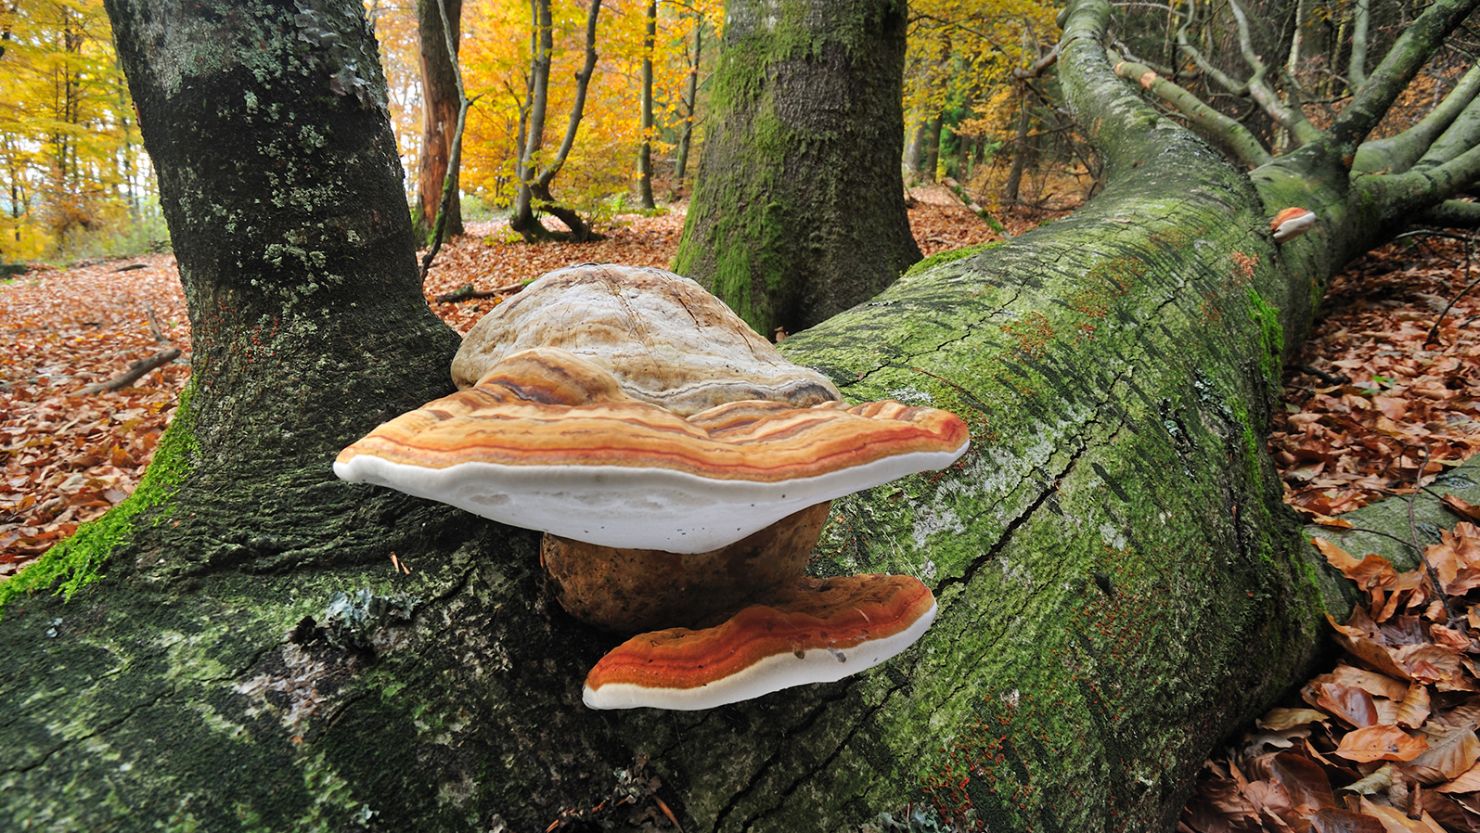 Fomes fomentarius, sometimes called tinder or hoof fungus, is shown on a fallen tree trunk in Belgium.  